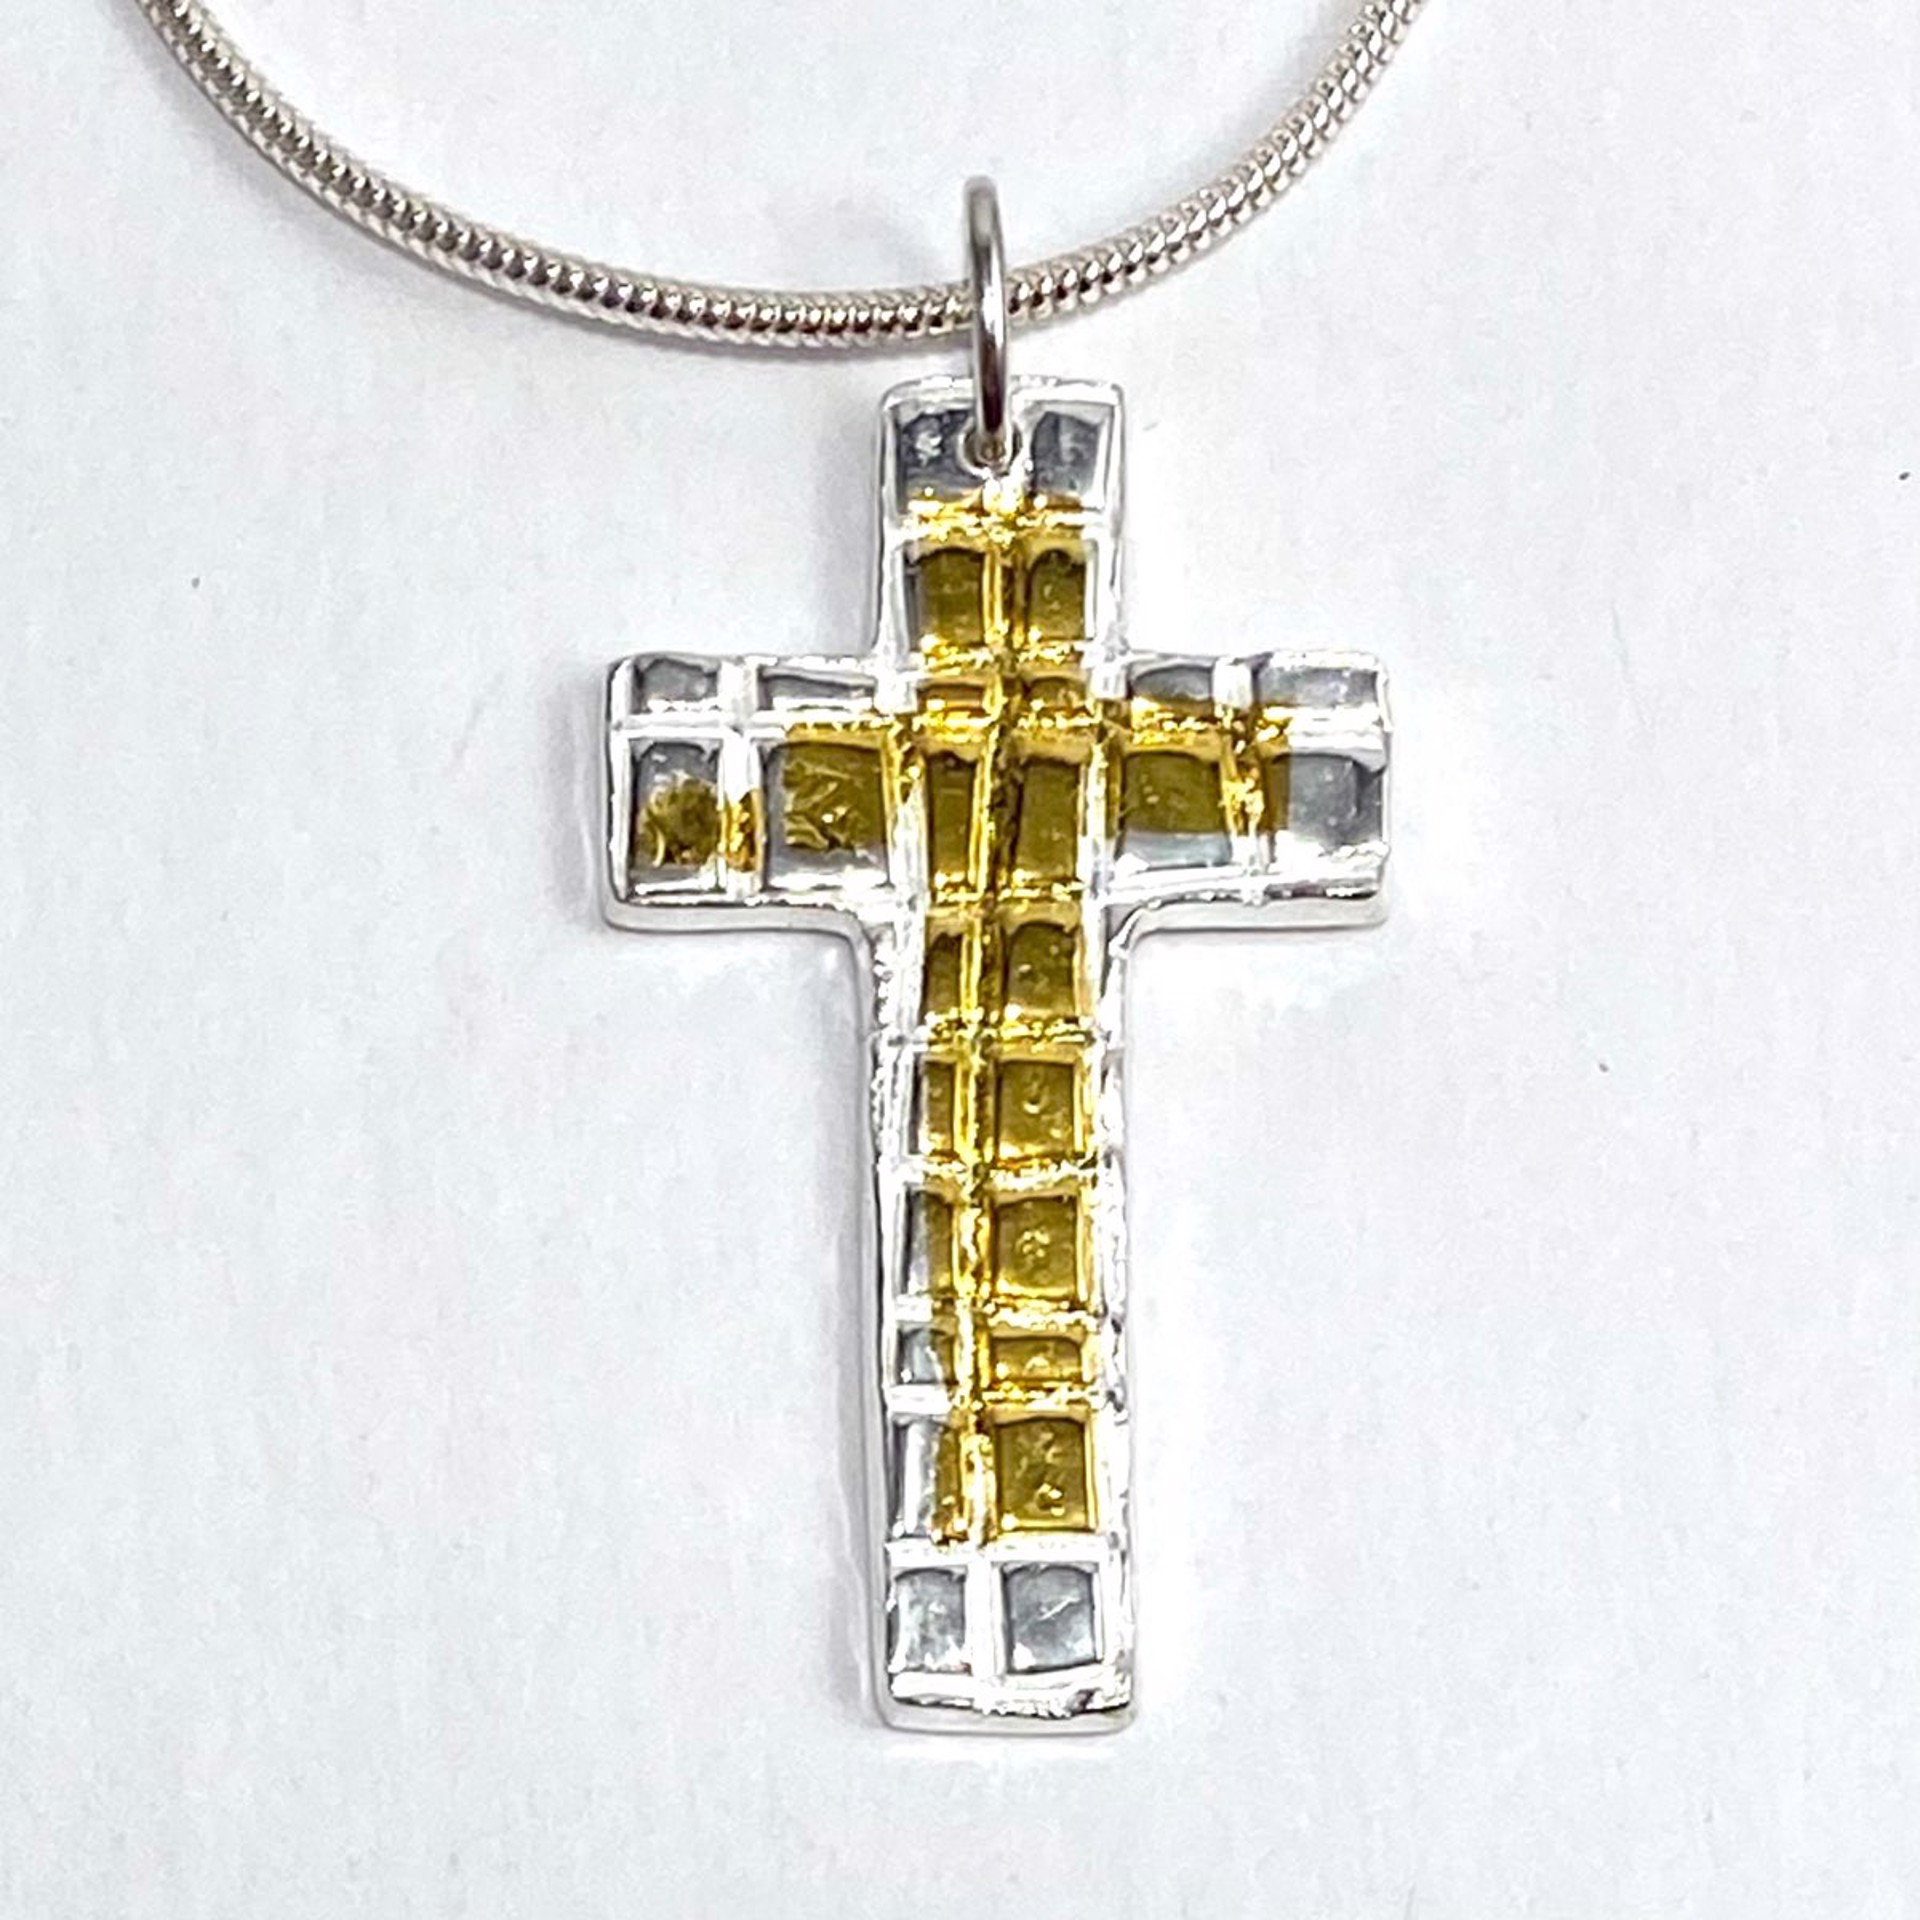 KH22-68 Keum-Boo Fine Silver and Gold Reversible Cross Necklace by Karen Hakim